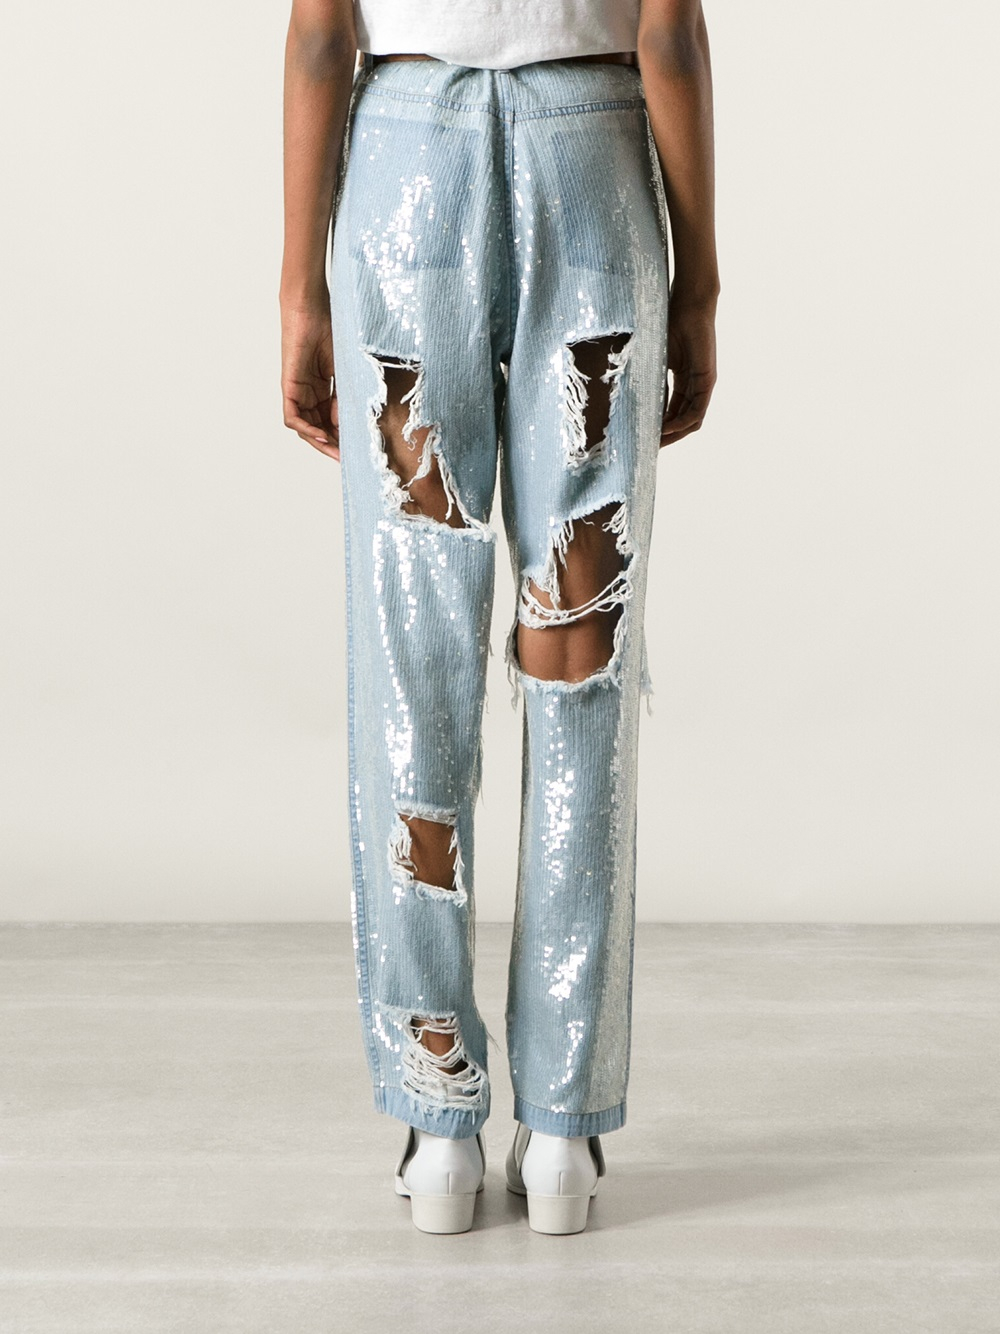 Lyst - Ashish Distressed Sequin Embroidered Jean in Blue